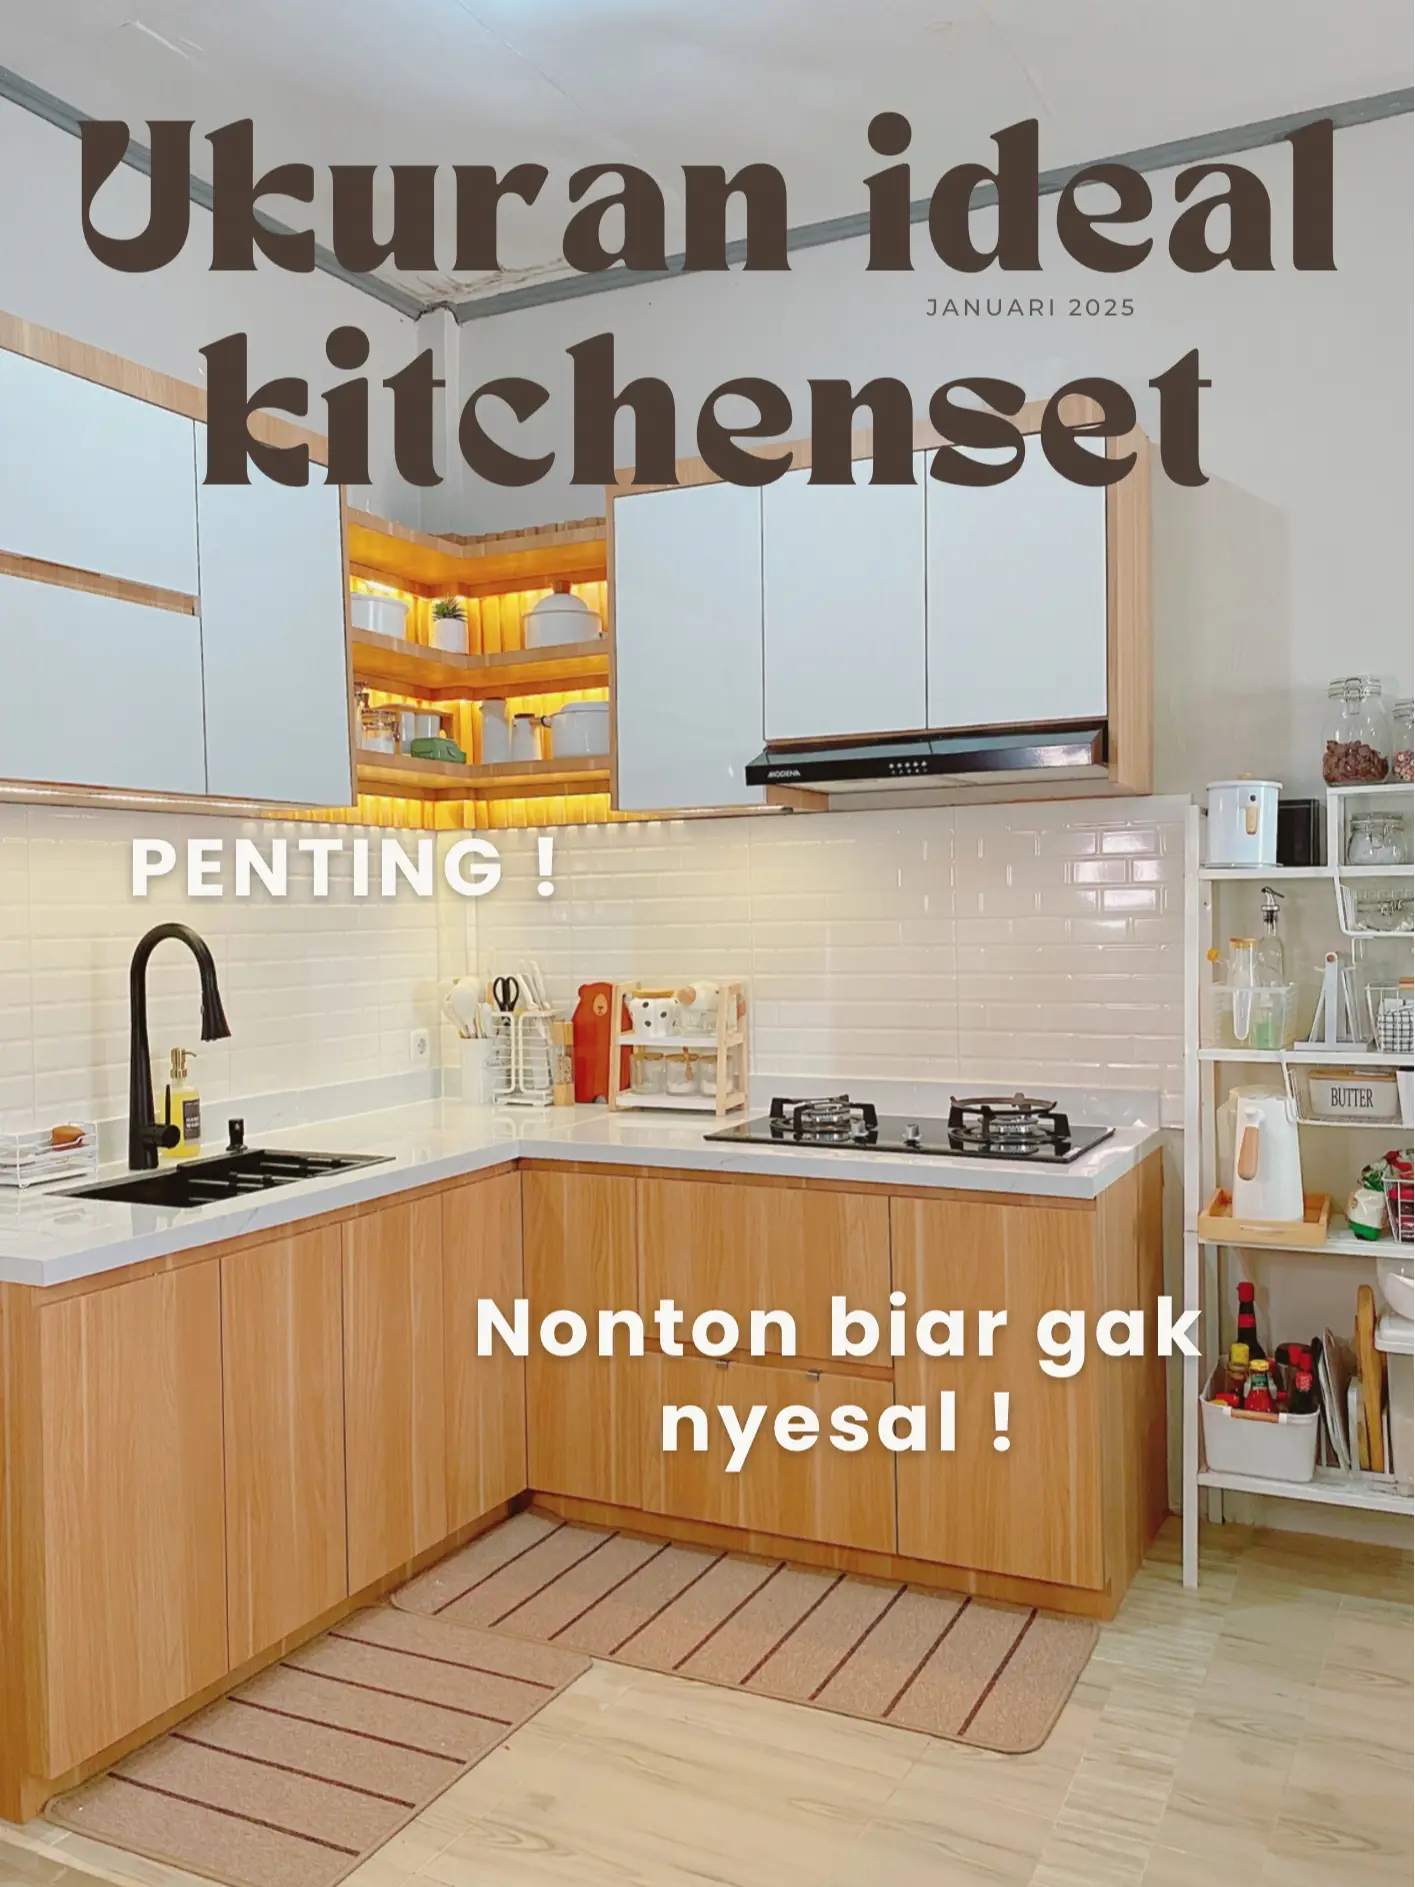 Efficient Culinary Spaces: Kitchenset Efficient Layout